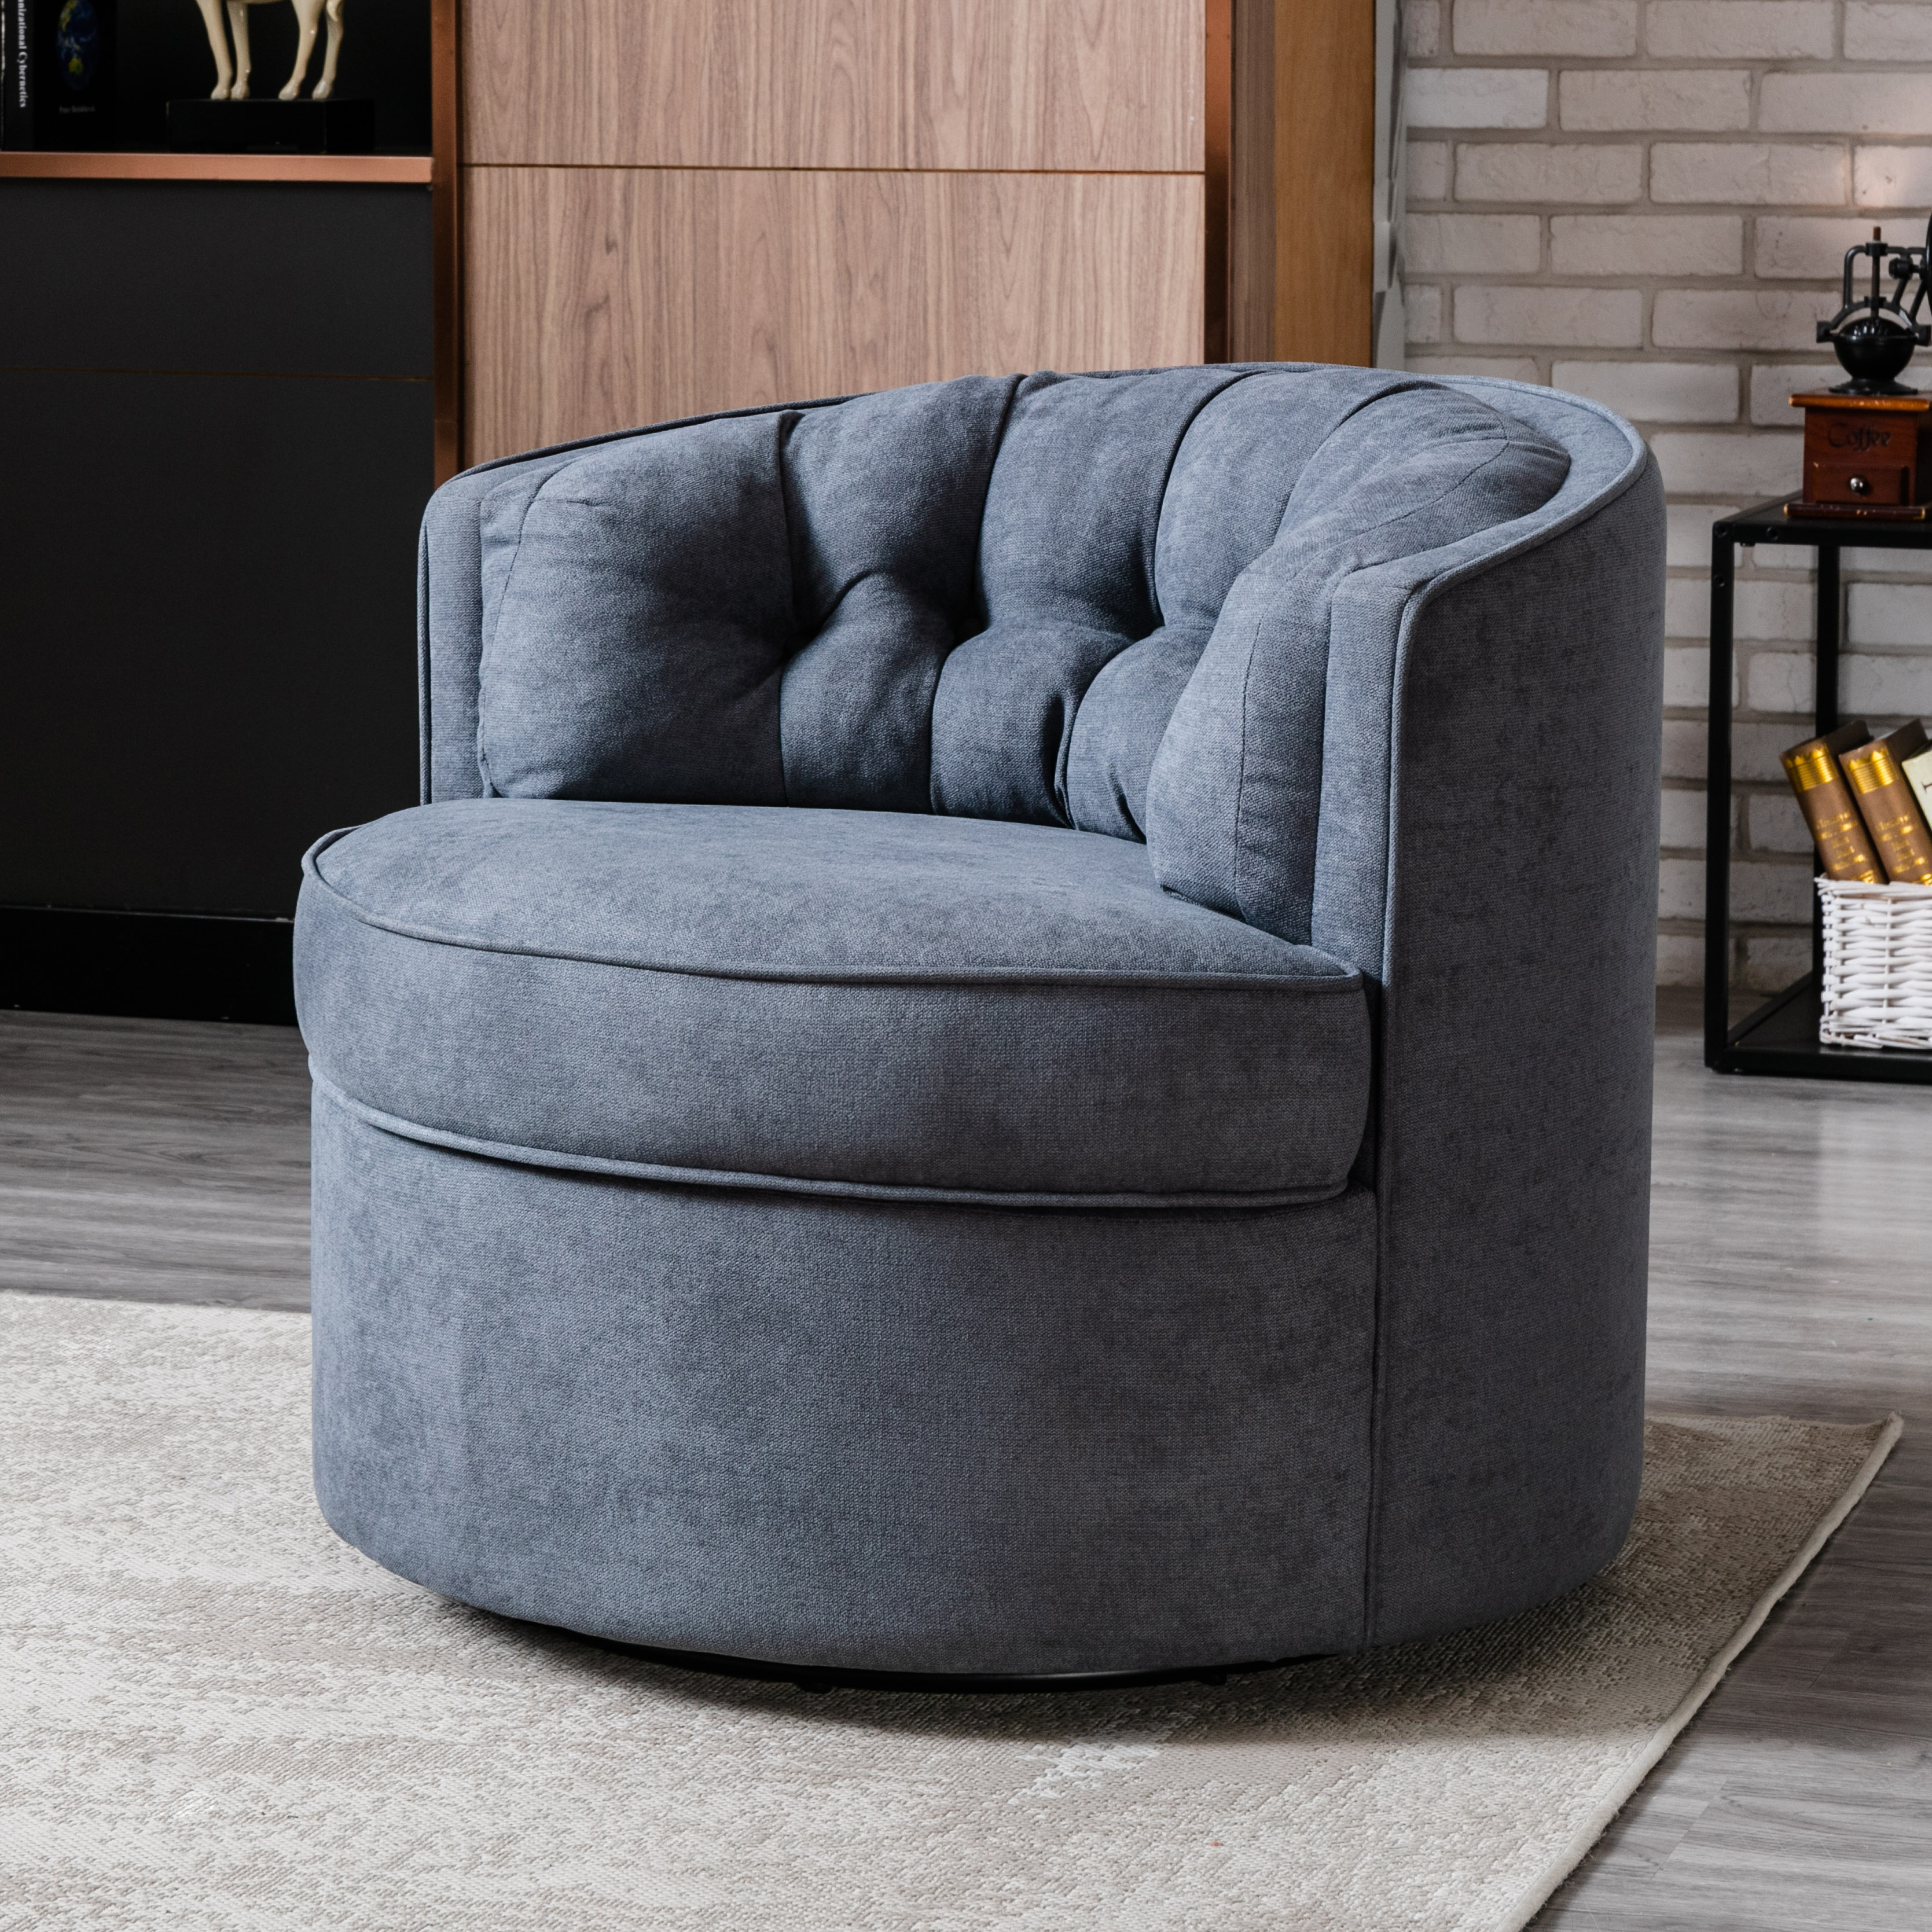 33&rdquo; Wide Swivel Barrel Chair Comfy Tufted Back Accent Round Barrel Chair Leisure Chair for Living Room, Bedroom, Hotel-CASAINC